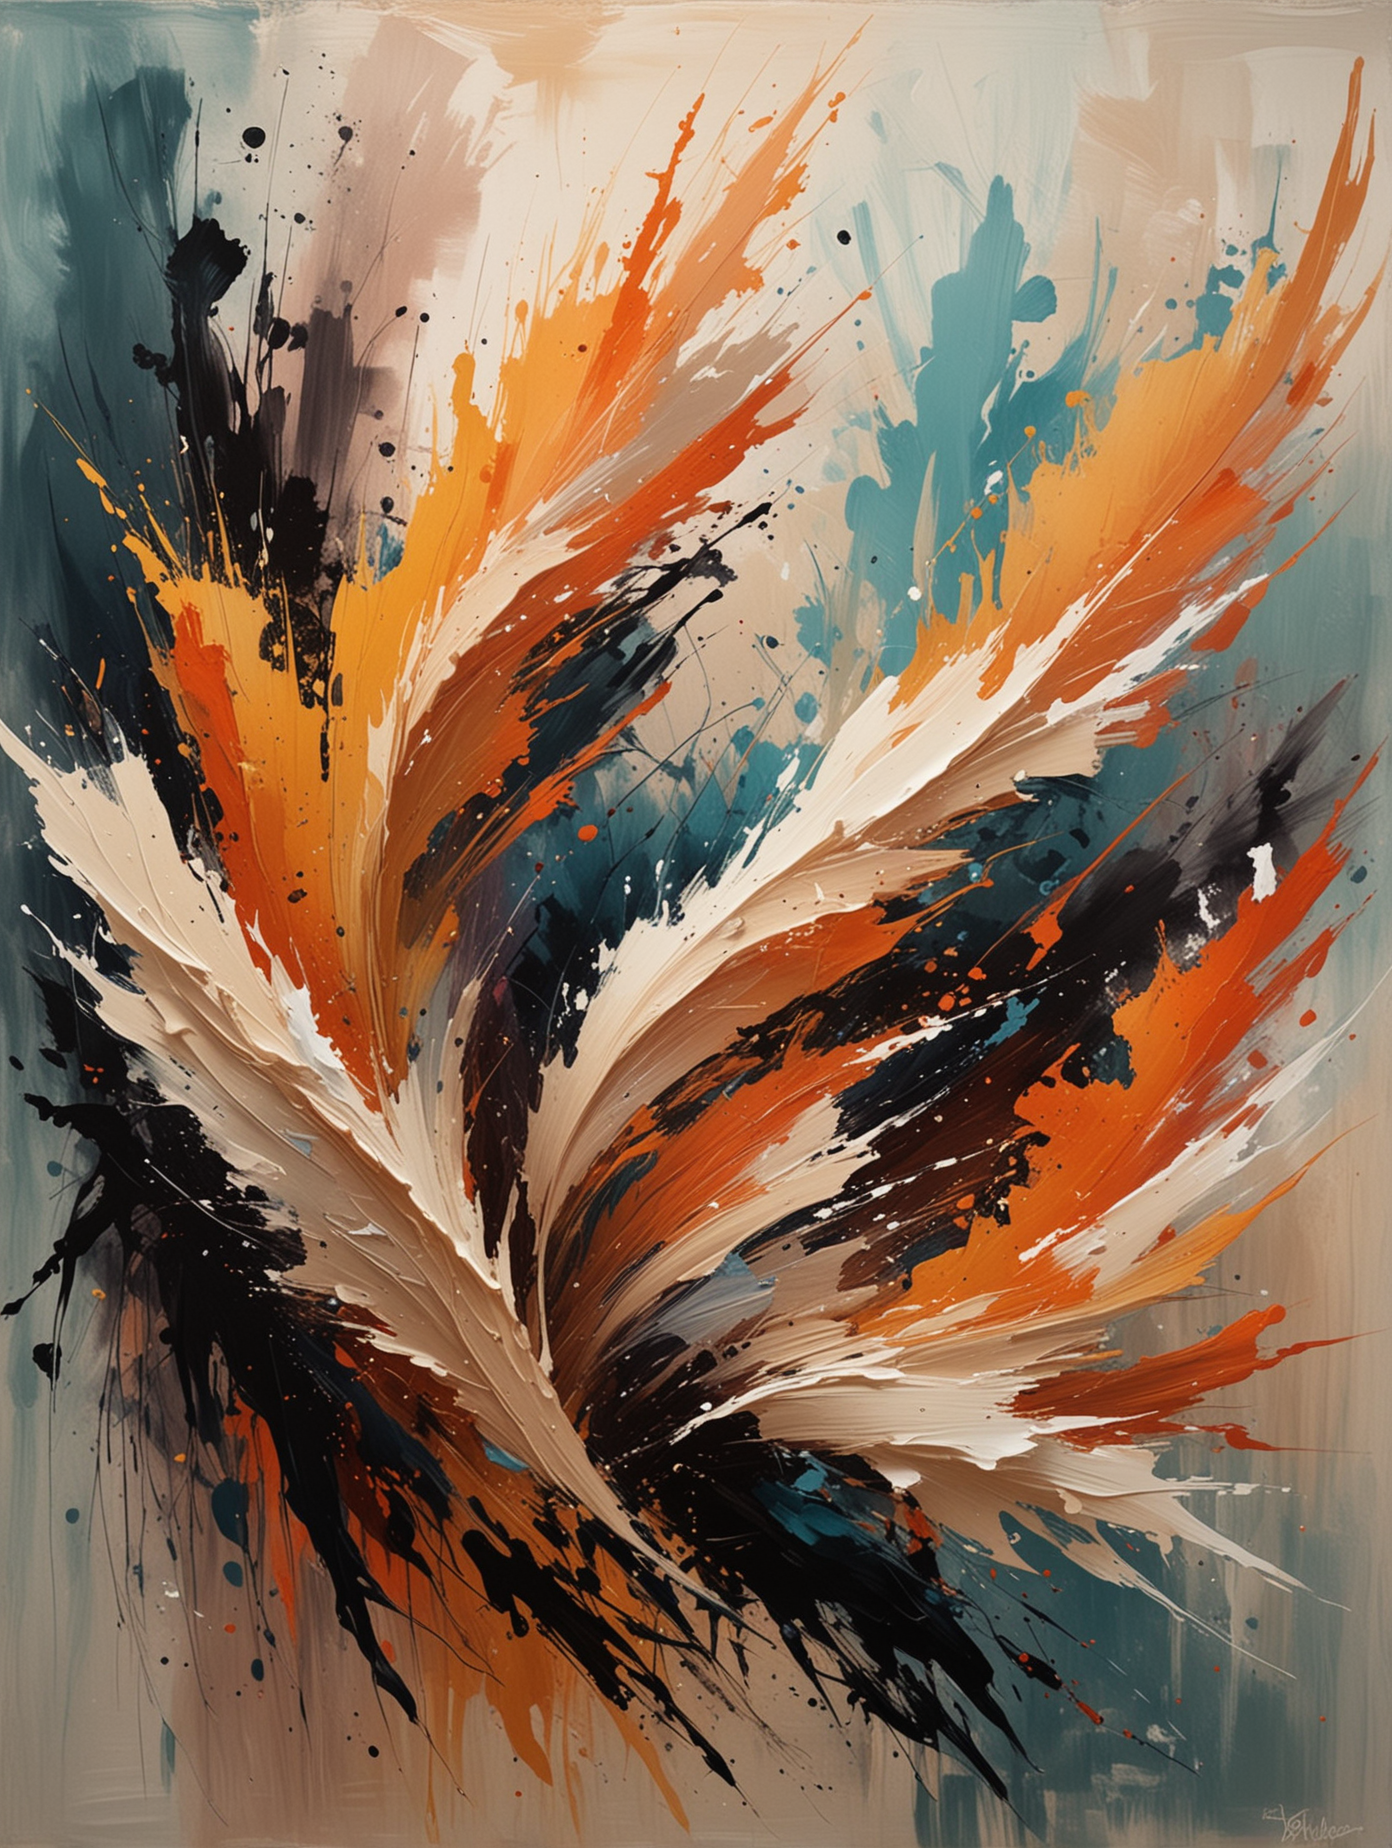 in style of baquiat create an abstract with thick brush strokes